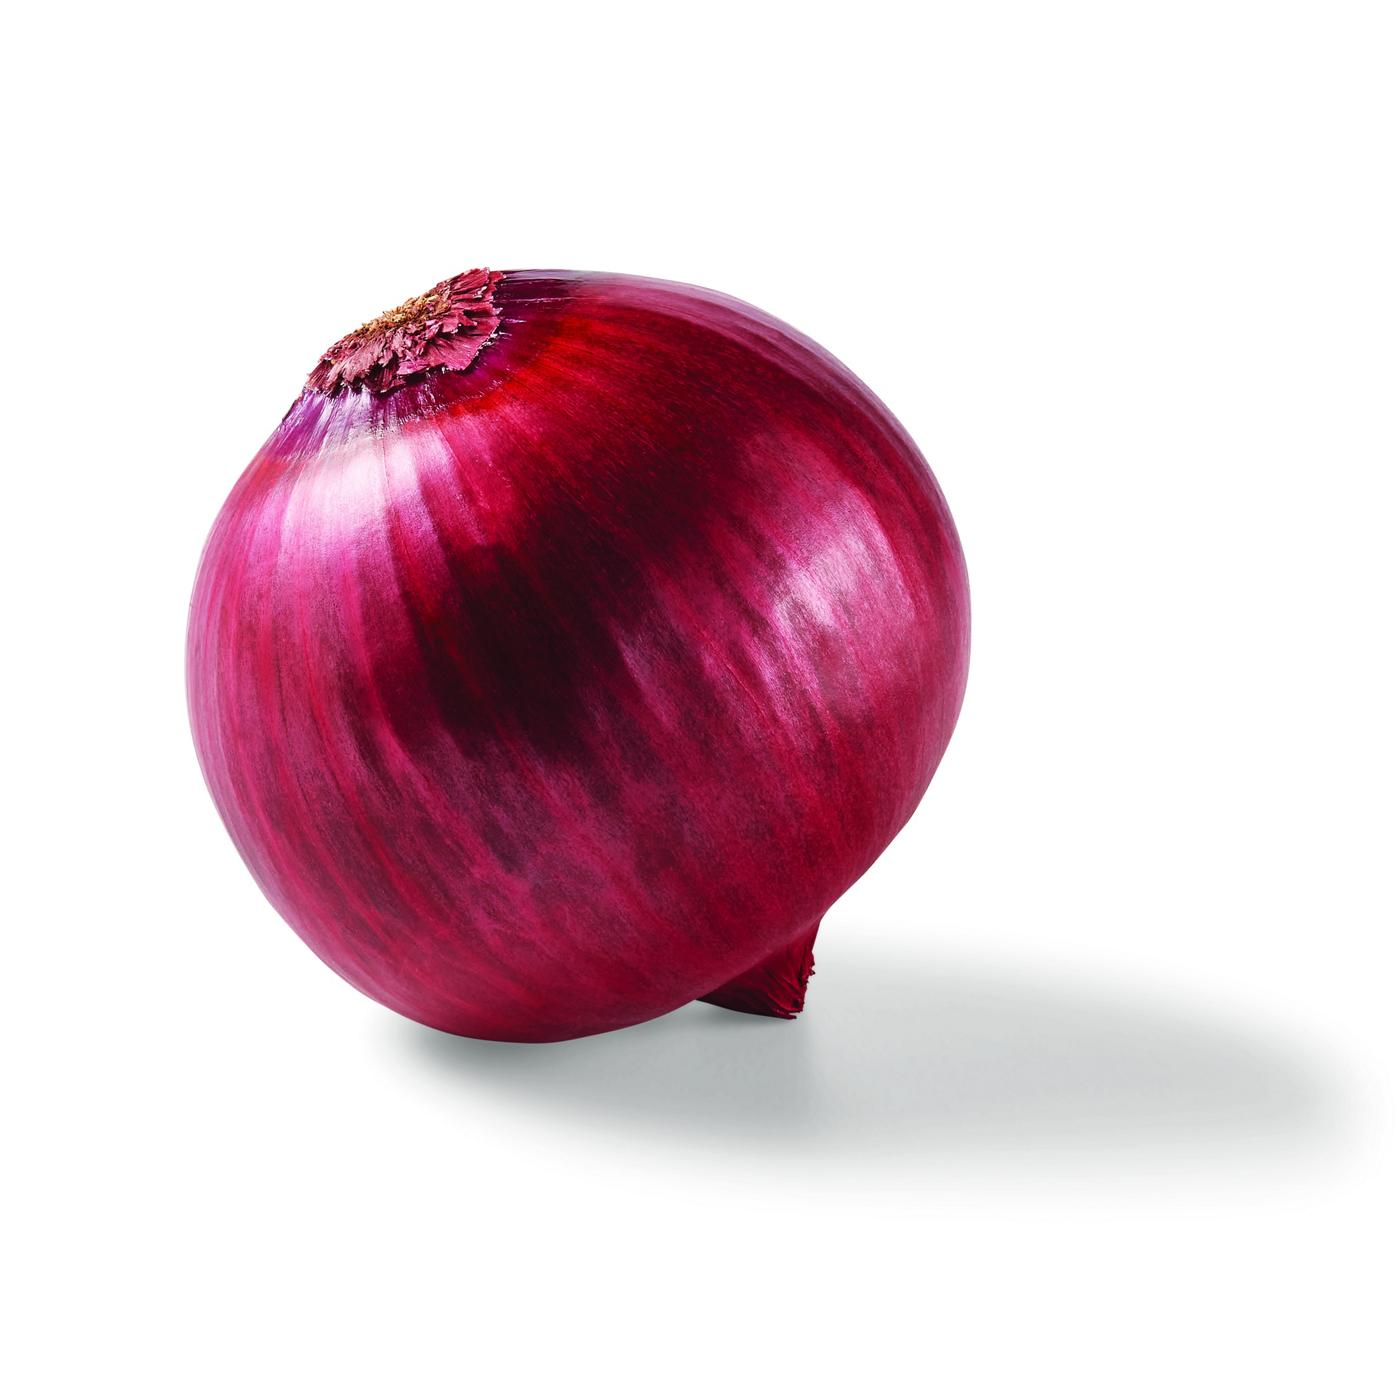 H-E-B Texas Roots Fresh Red Onion; image 1 of 3